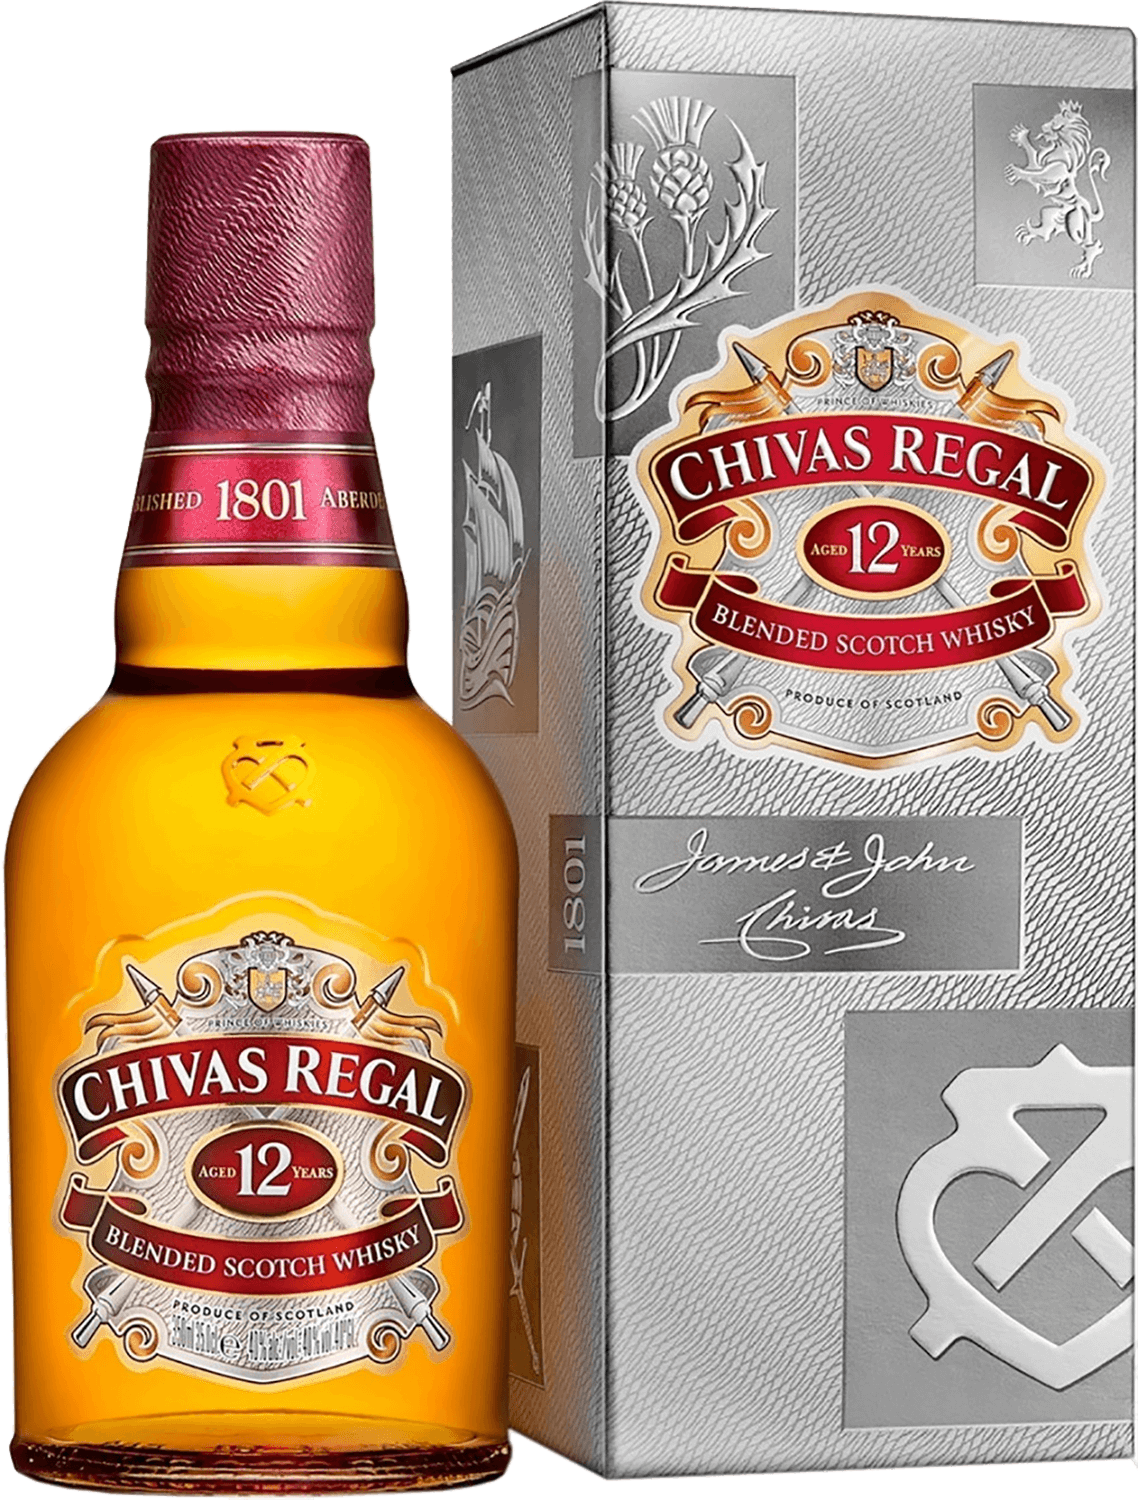 Chivas Regal Blended Scotch Whisky 12 y.o. (gift box) chivas regal extra oloroso sherry cask blended scotch whisky 13 y o gift box